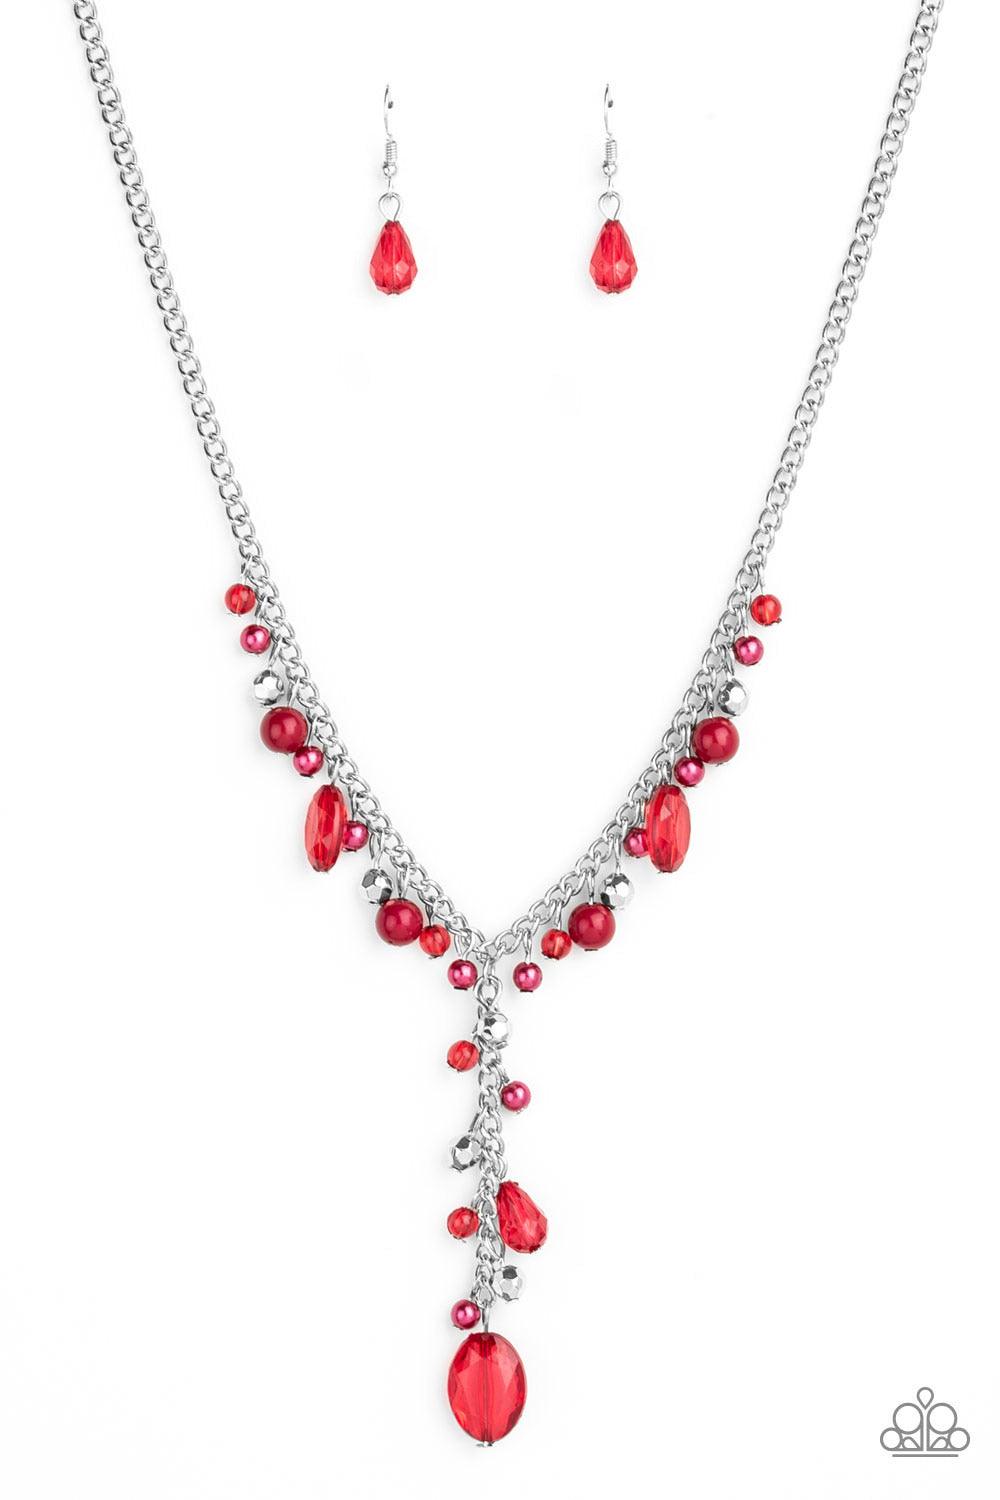 Paparazzi Accessories Crystal Couture - Red Mismatched polished red beads, crystal-like beads, and faceted silver beads dance along a shimmery silver chain. Matching beading trickles along a single silver chain, creating a romantic extended pendant below